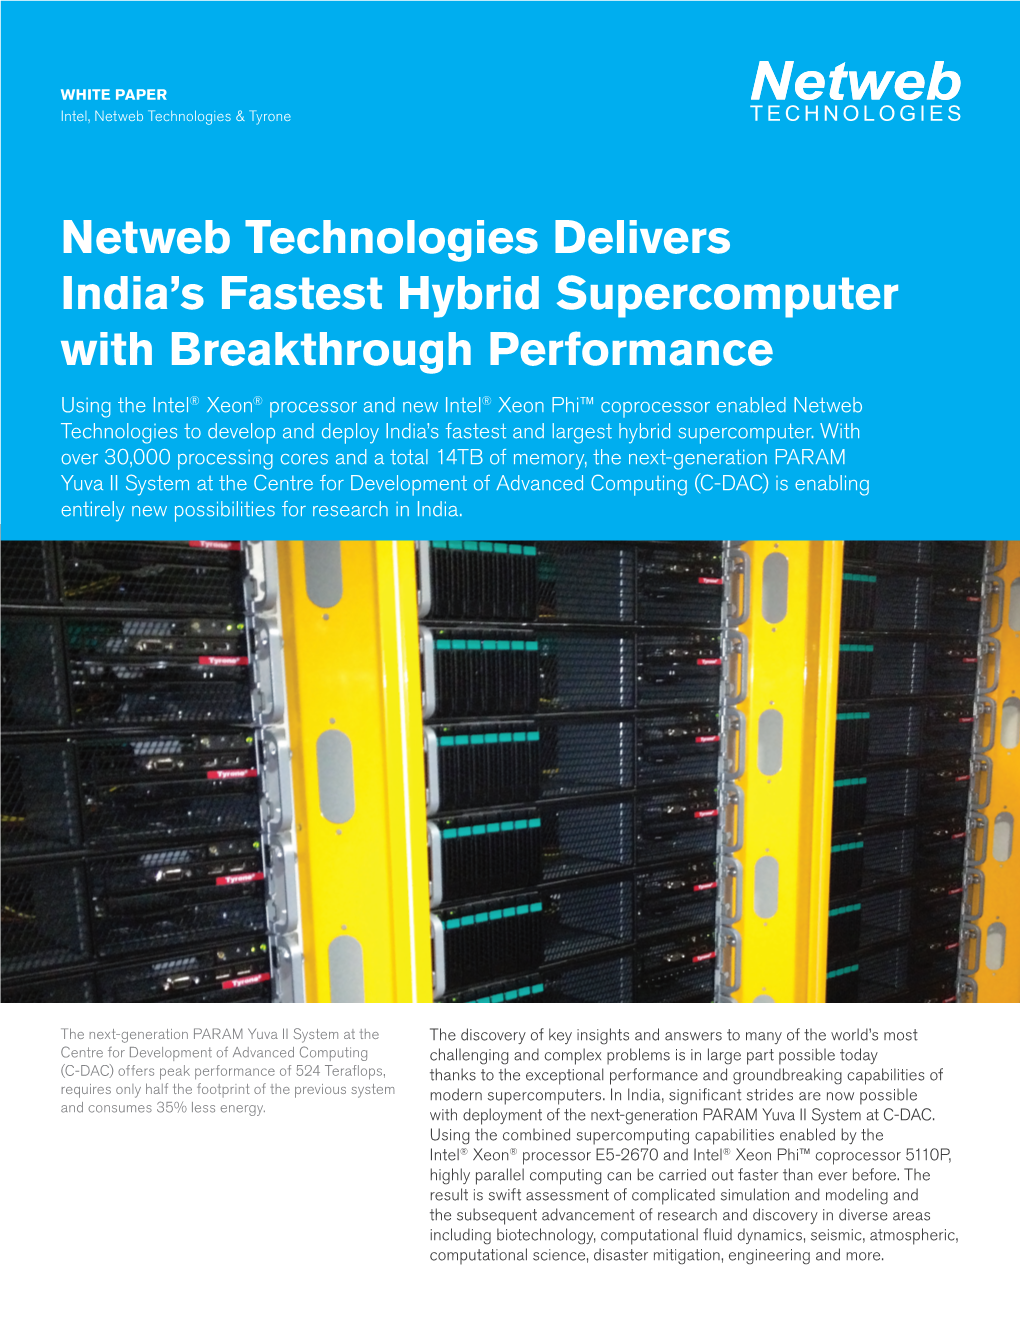 Netweb Technologies Delivers India's Fastest Hybrid Supercomputer With